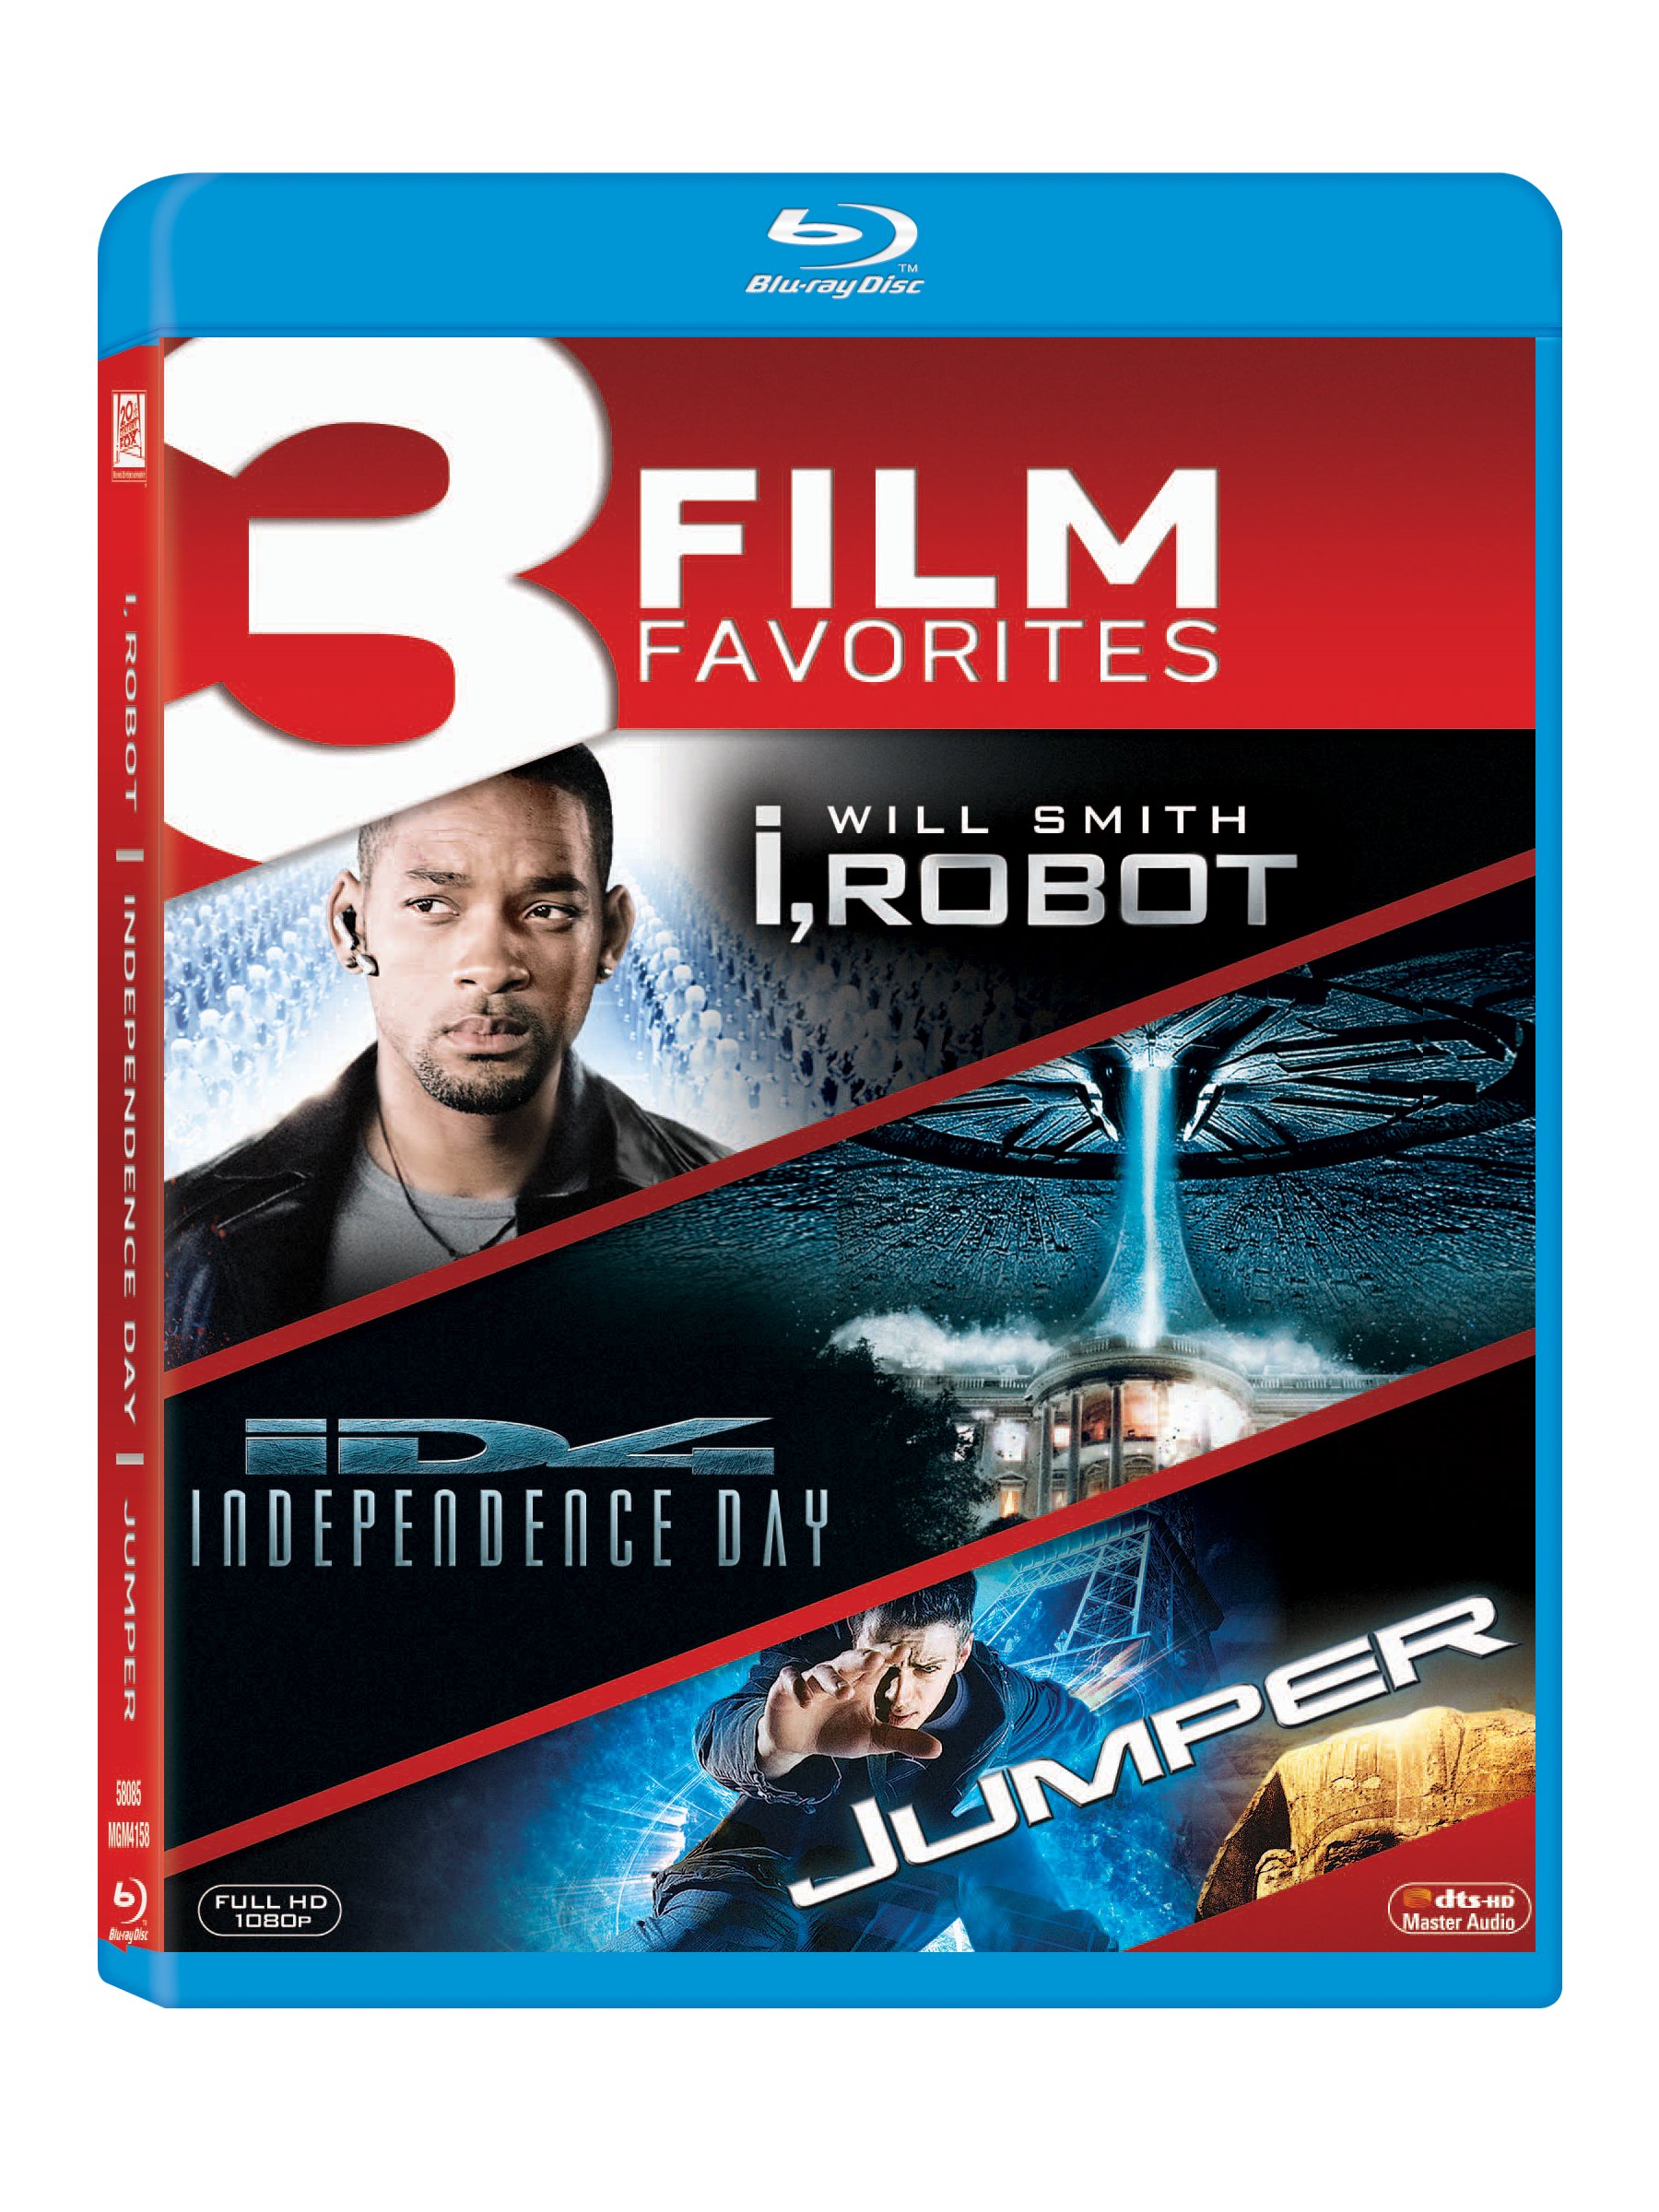 3-sci-fi-movies-collection-i-robot-independence-day-jumper-3-disc-box-set